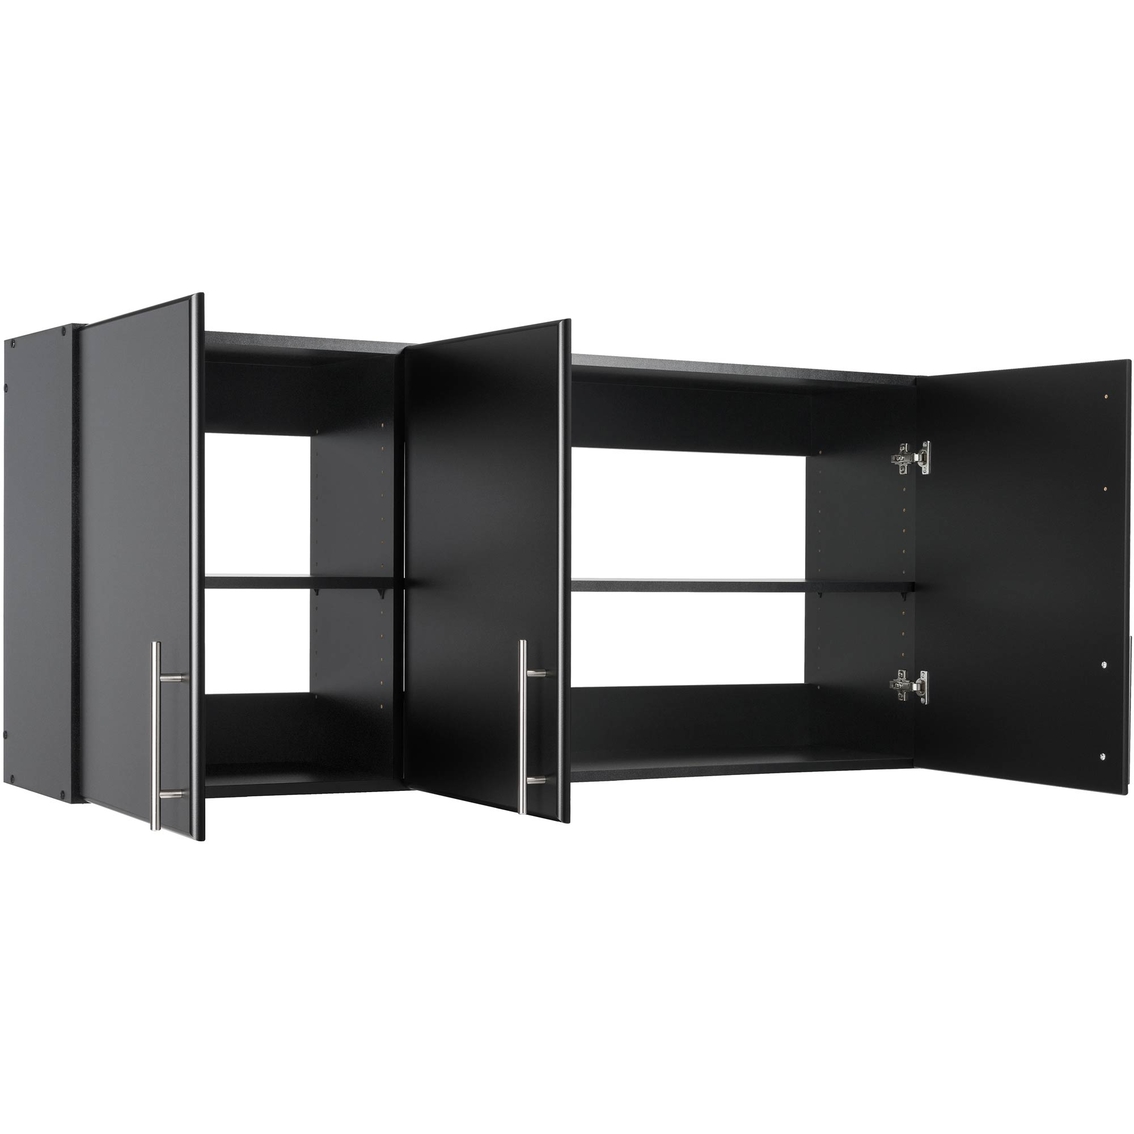 Elite 54 In. Wall Cabinet - Image 2 of 4